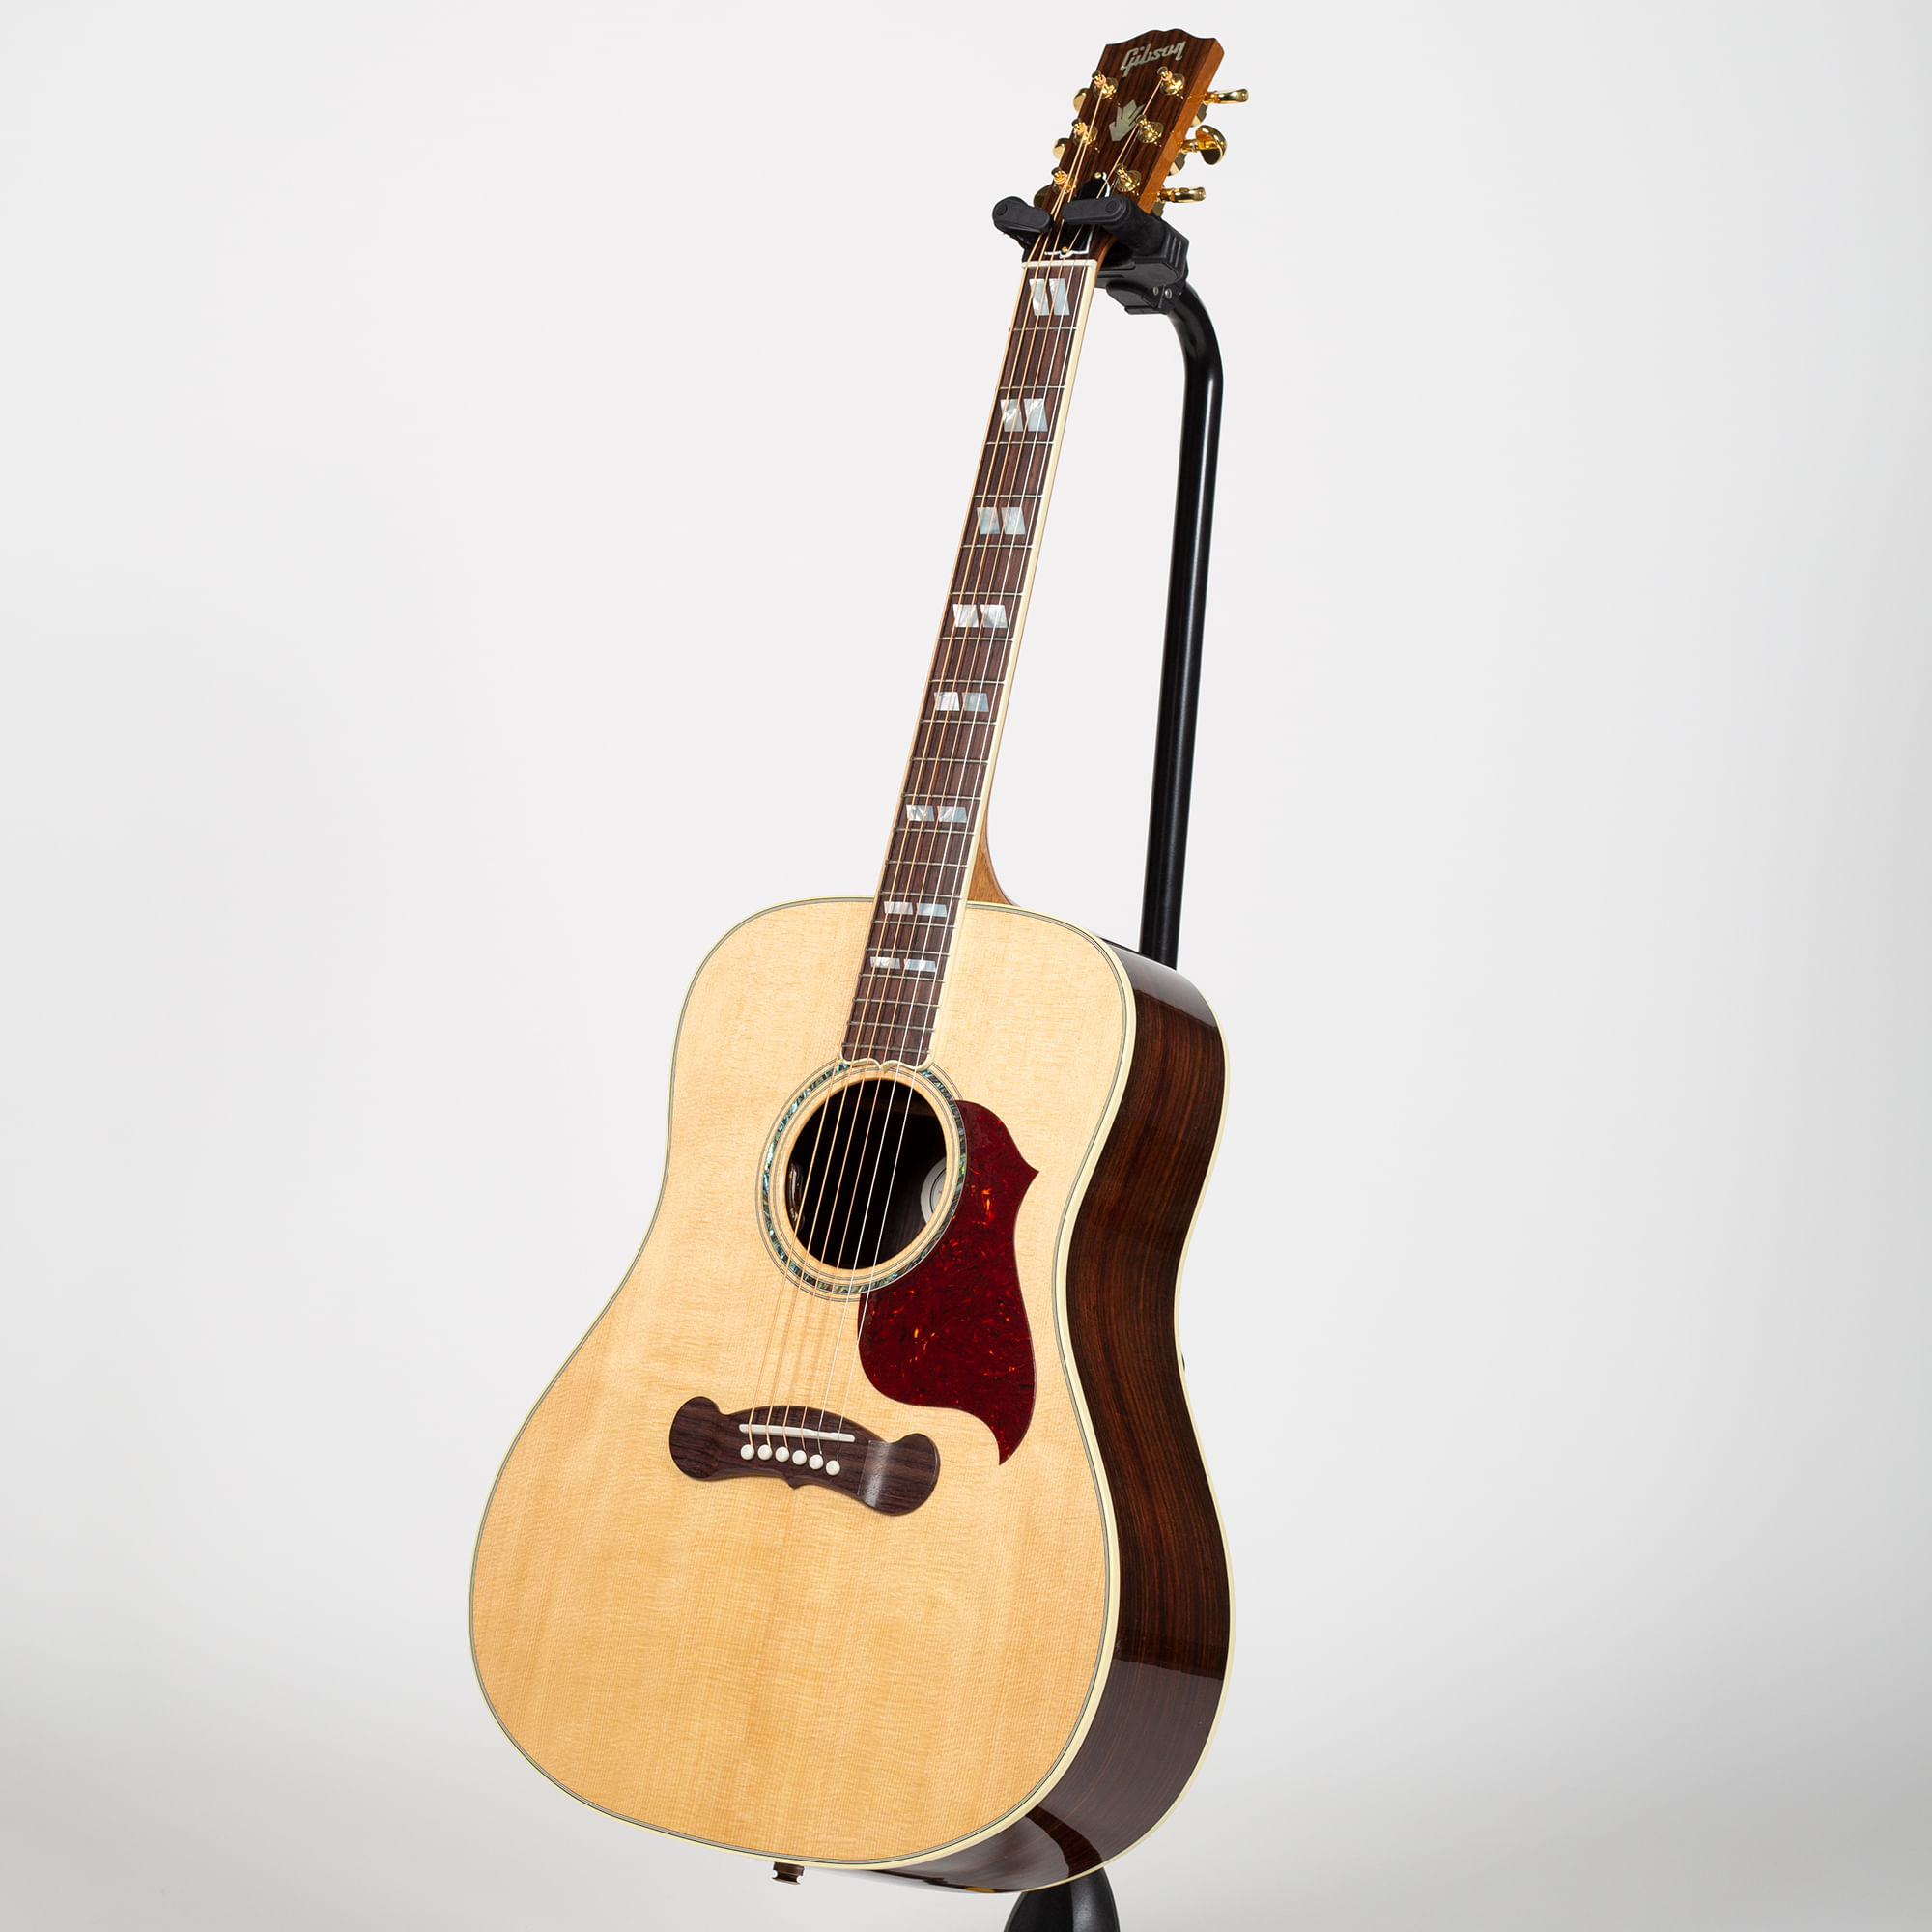 Shop Acoustic Guitars - Cosmo Music